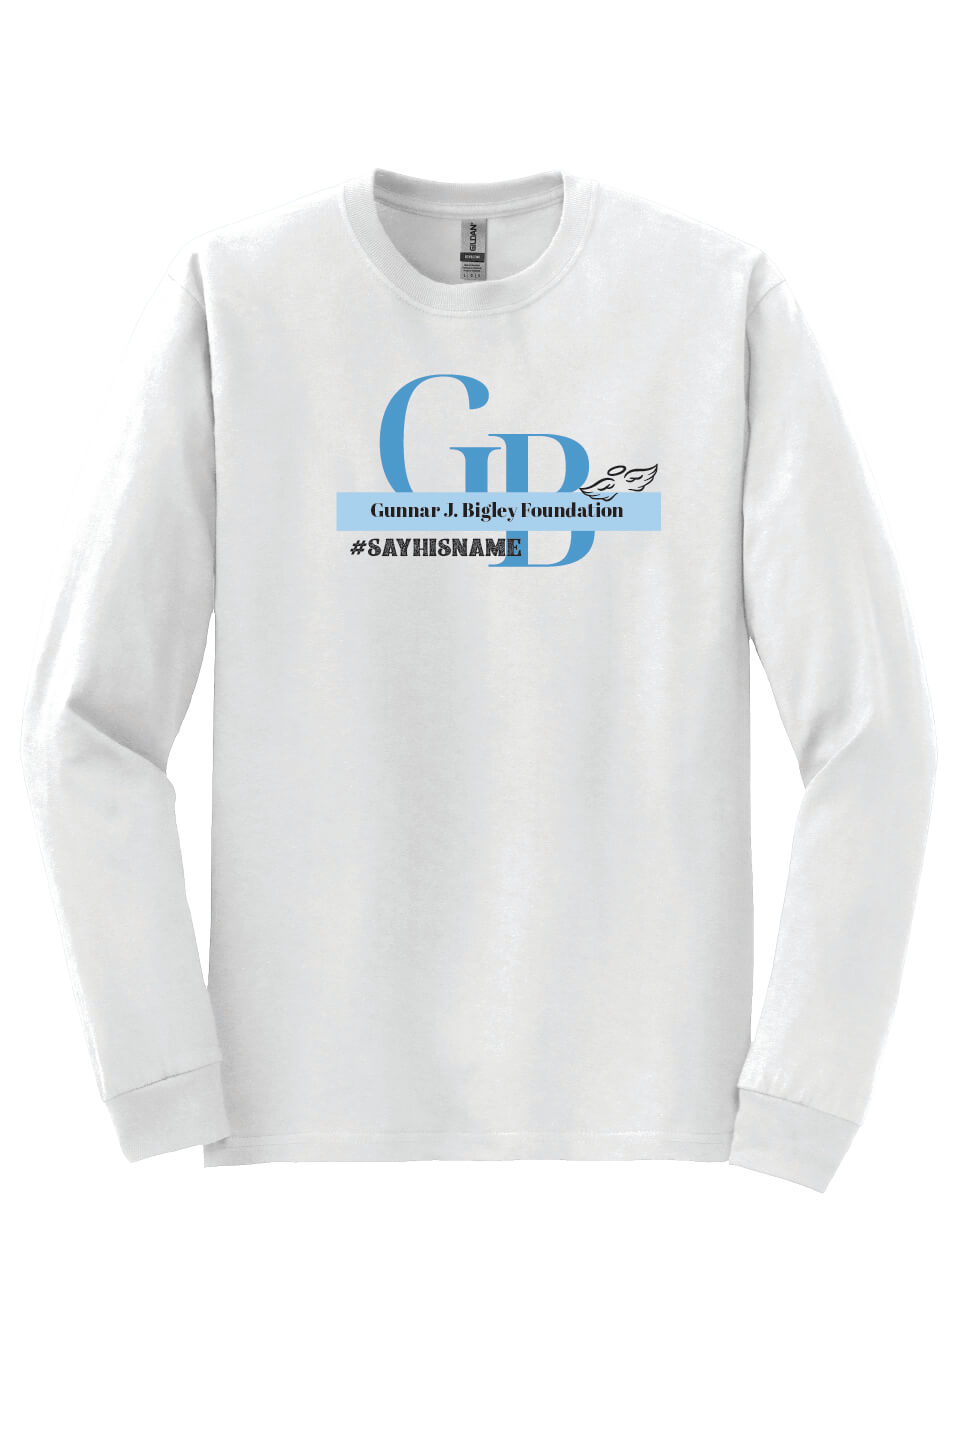 Long Sleeve T-Shirt (Youth) - Word Art I white front